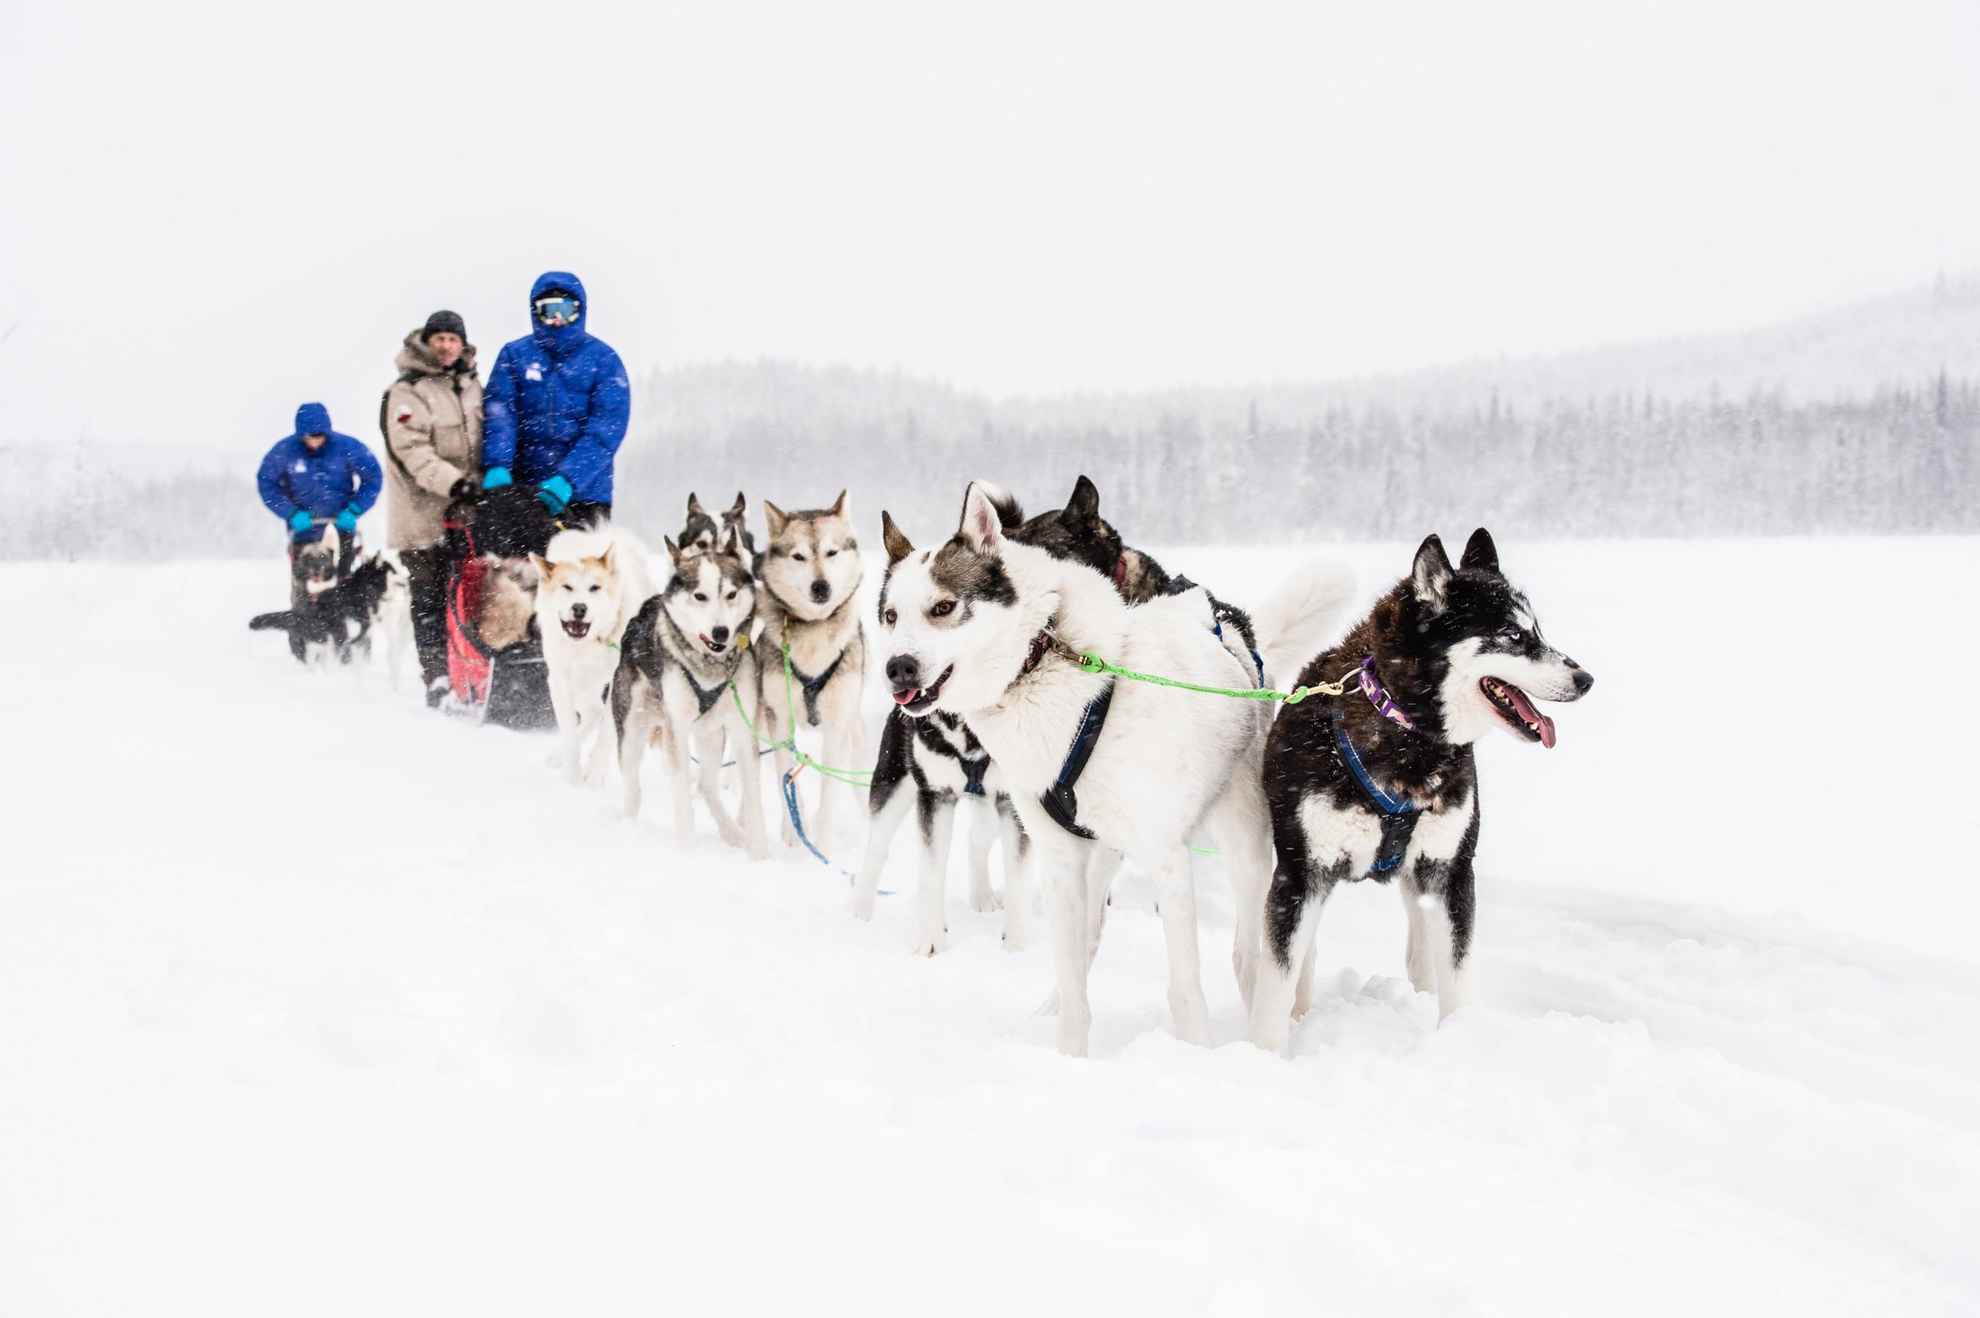 A dog sledge with several dogs and two persons on the sledge, in a snowy landscape.